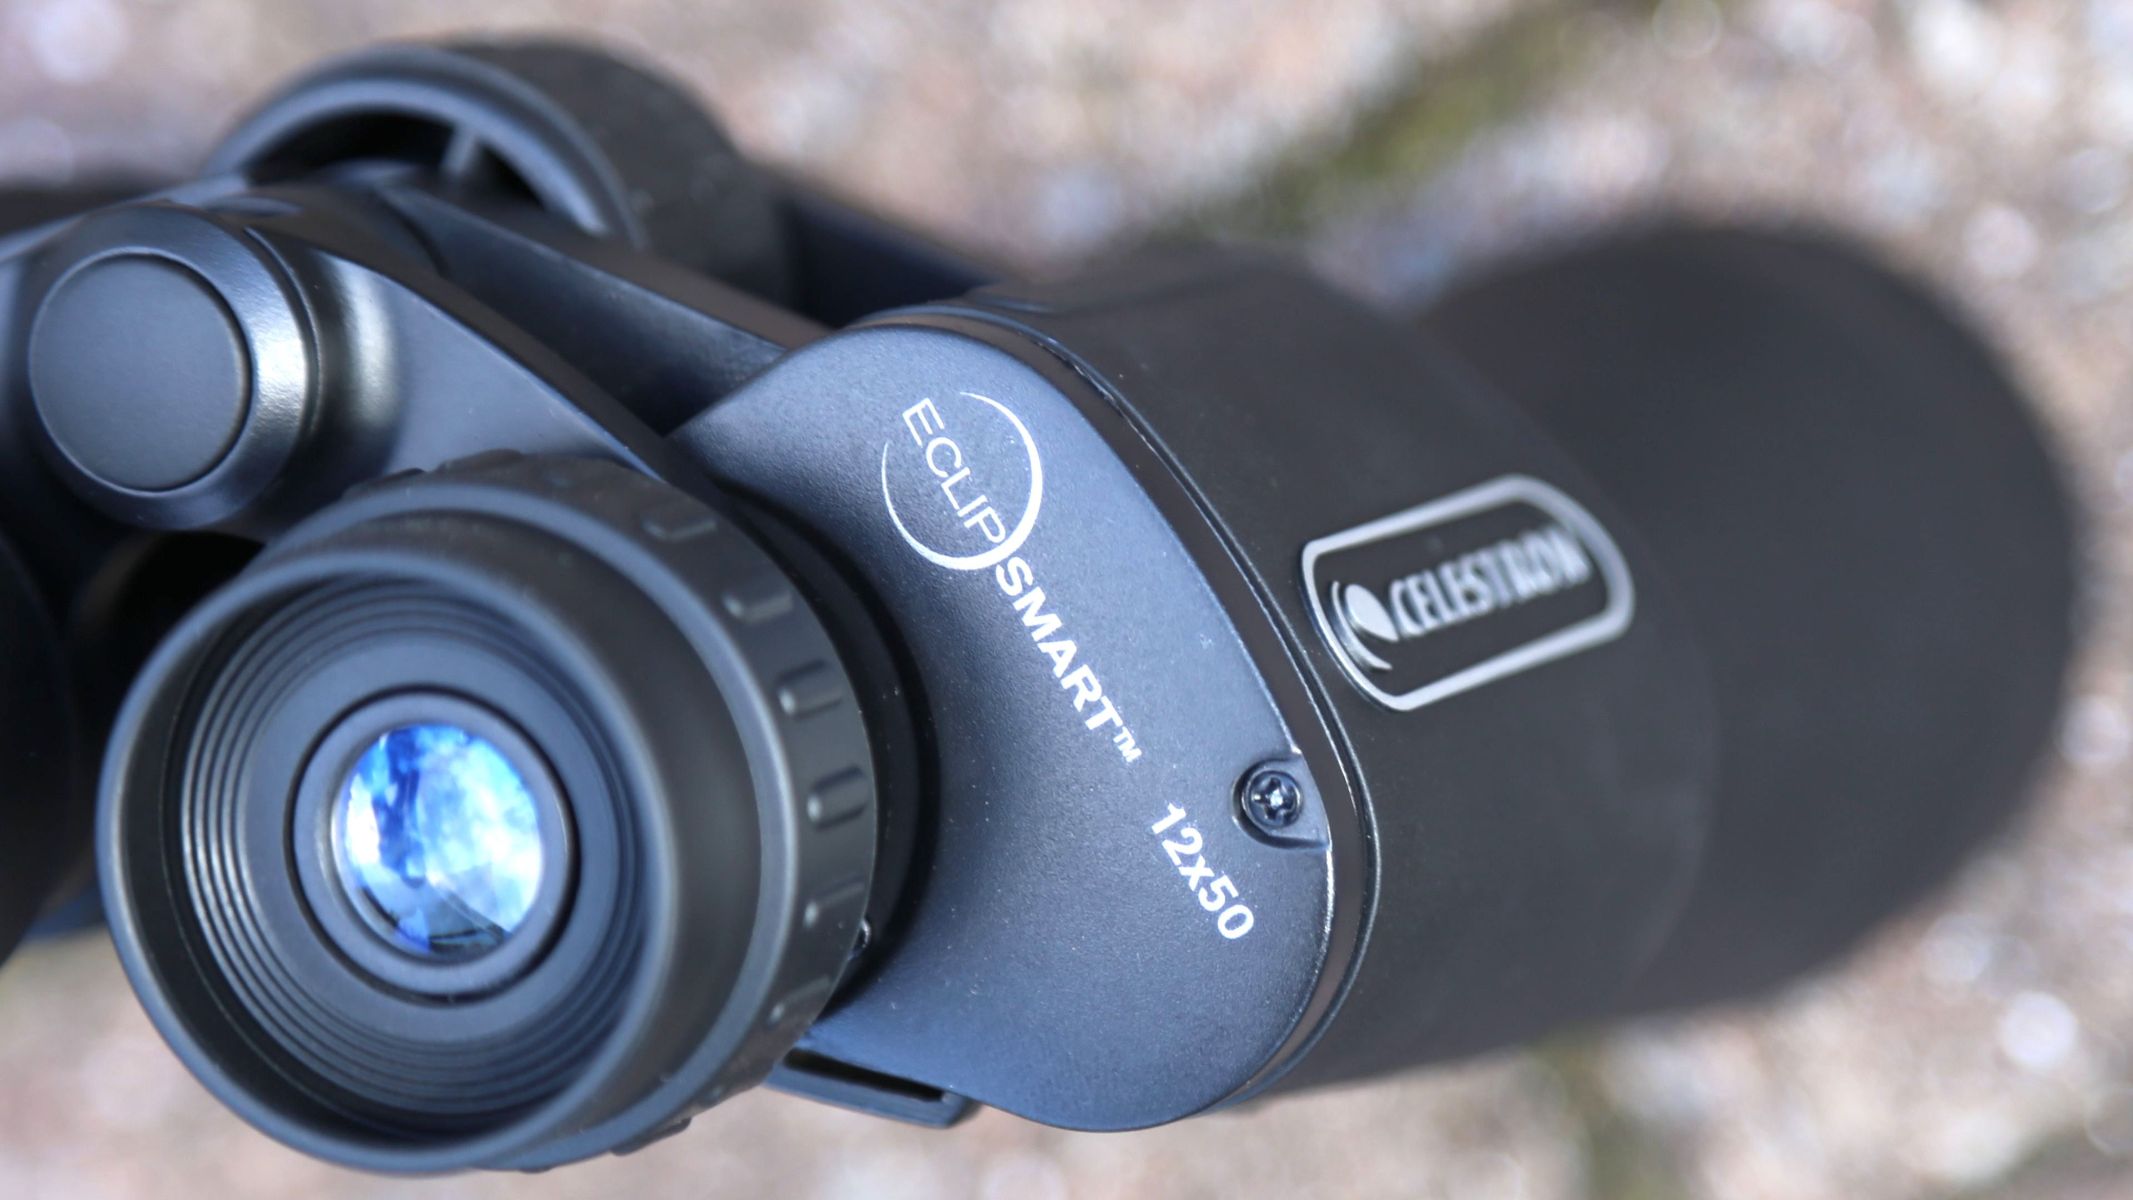 View of labels on the EclipSmart 12x50 binoculars